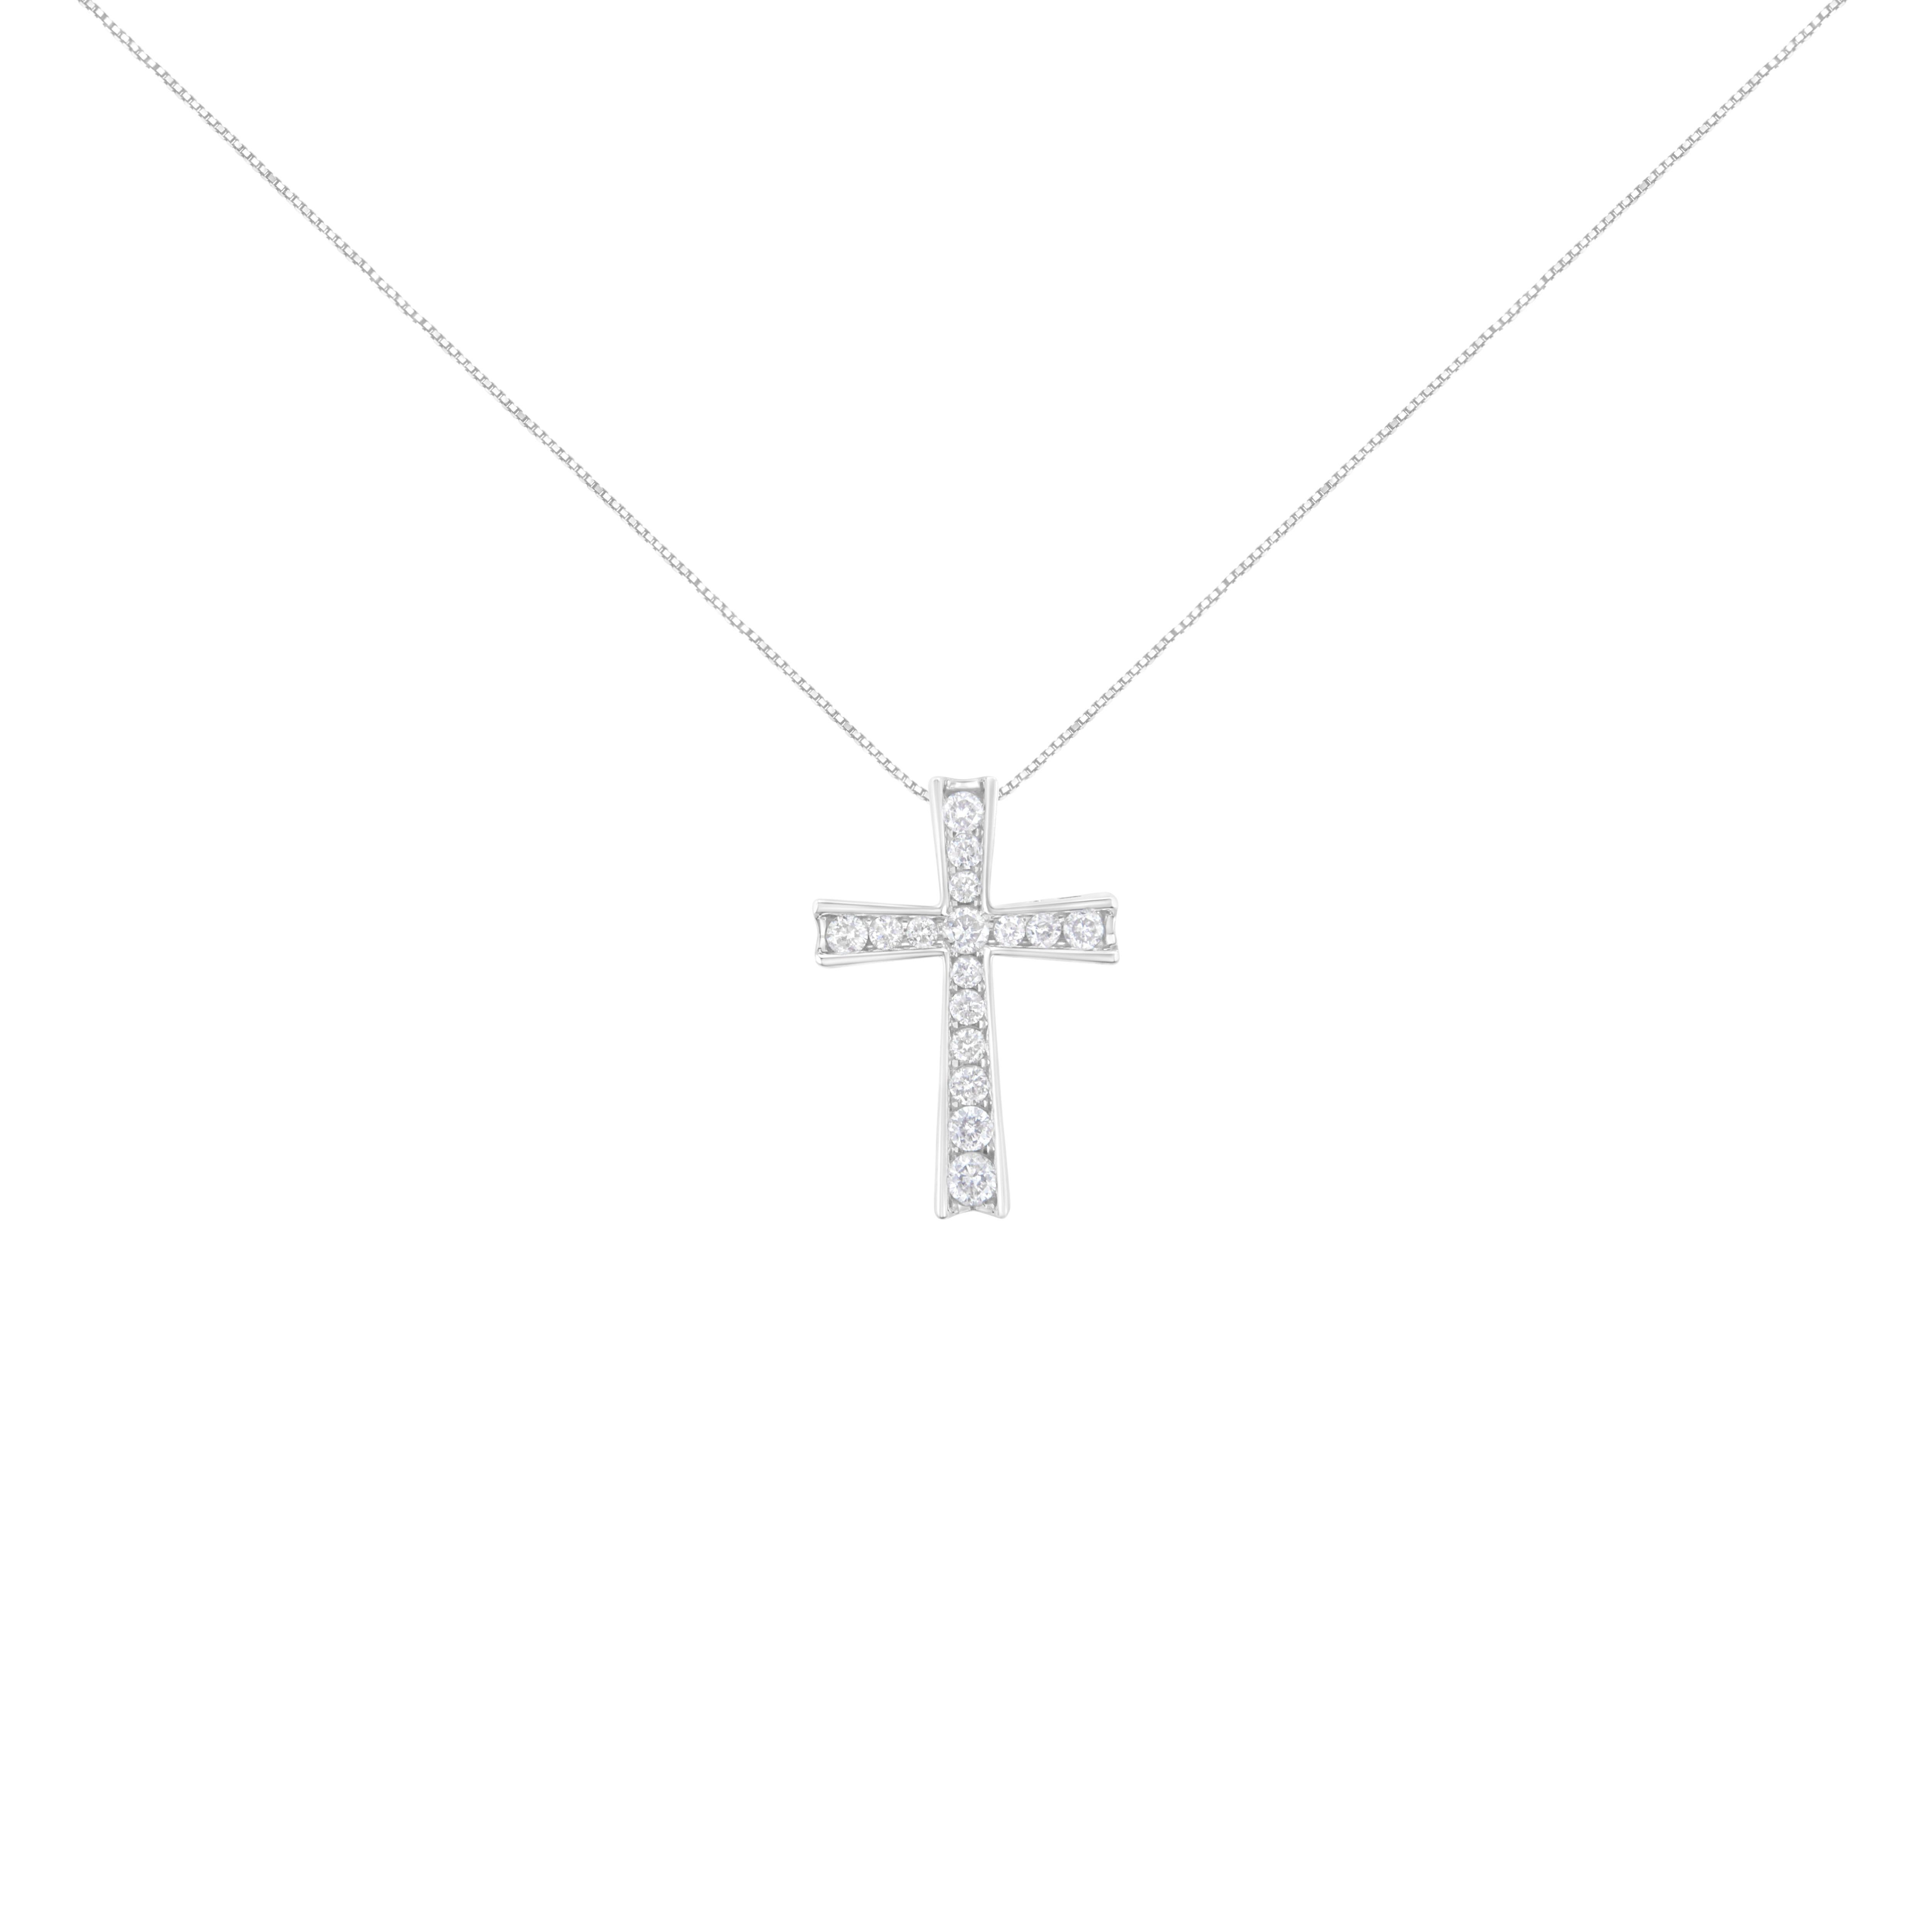 Seventeen dazzling prong set round cut diamonds stud this beautiful cross pendant. This symbol of faith is crafted in sterling silver and features 1/2ct TDW in diamonds. A box chain that secures with a spring ring clasp is the perfect complement to